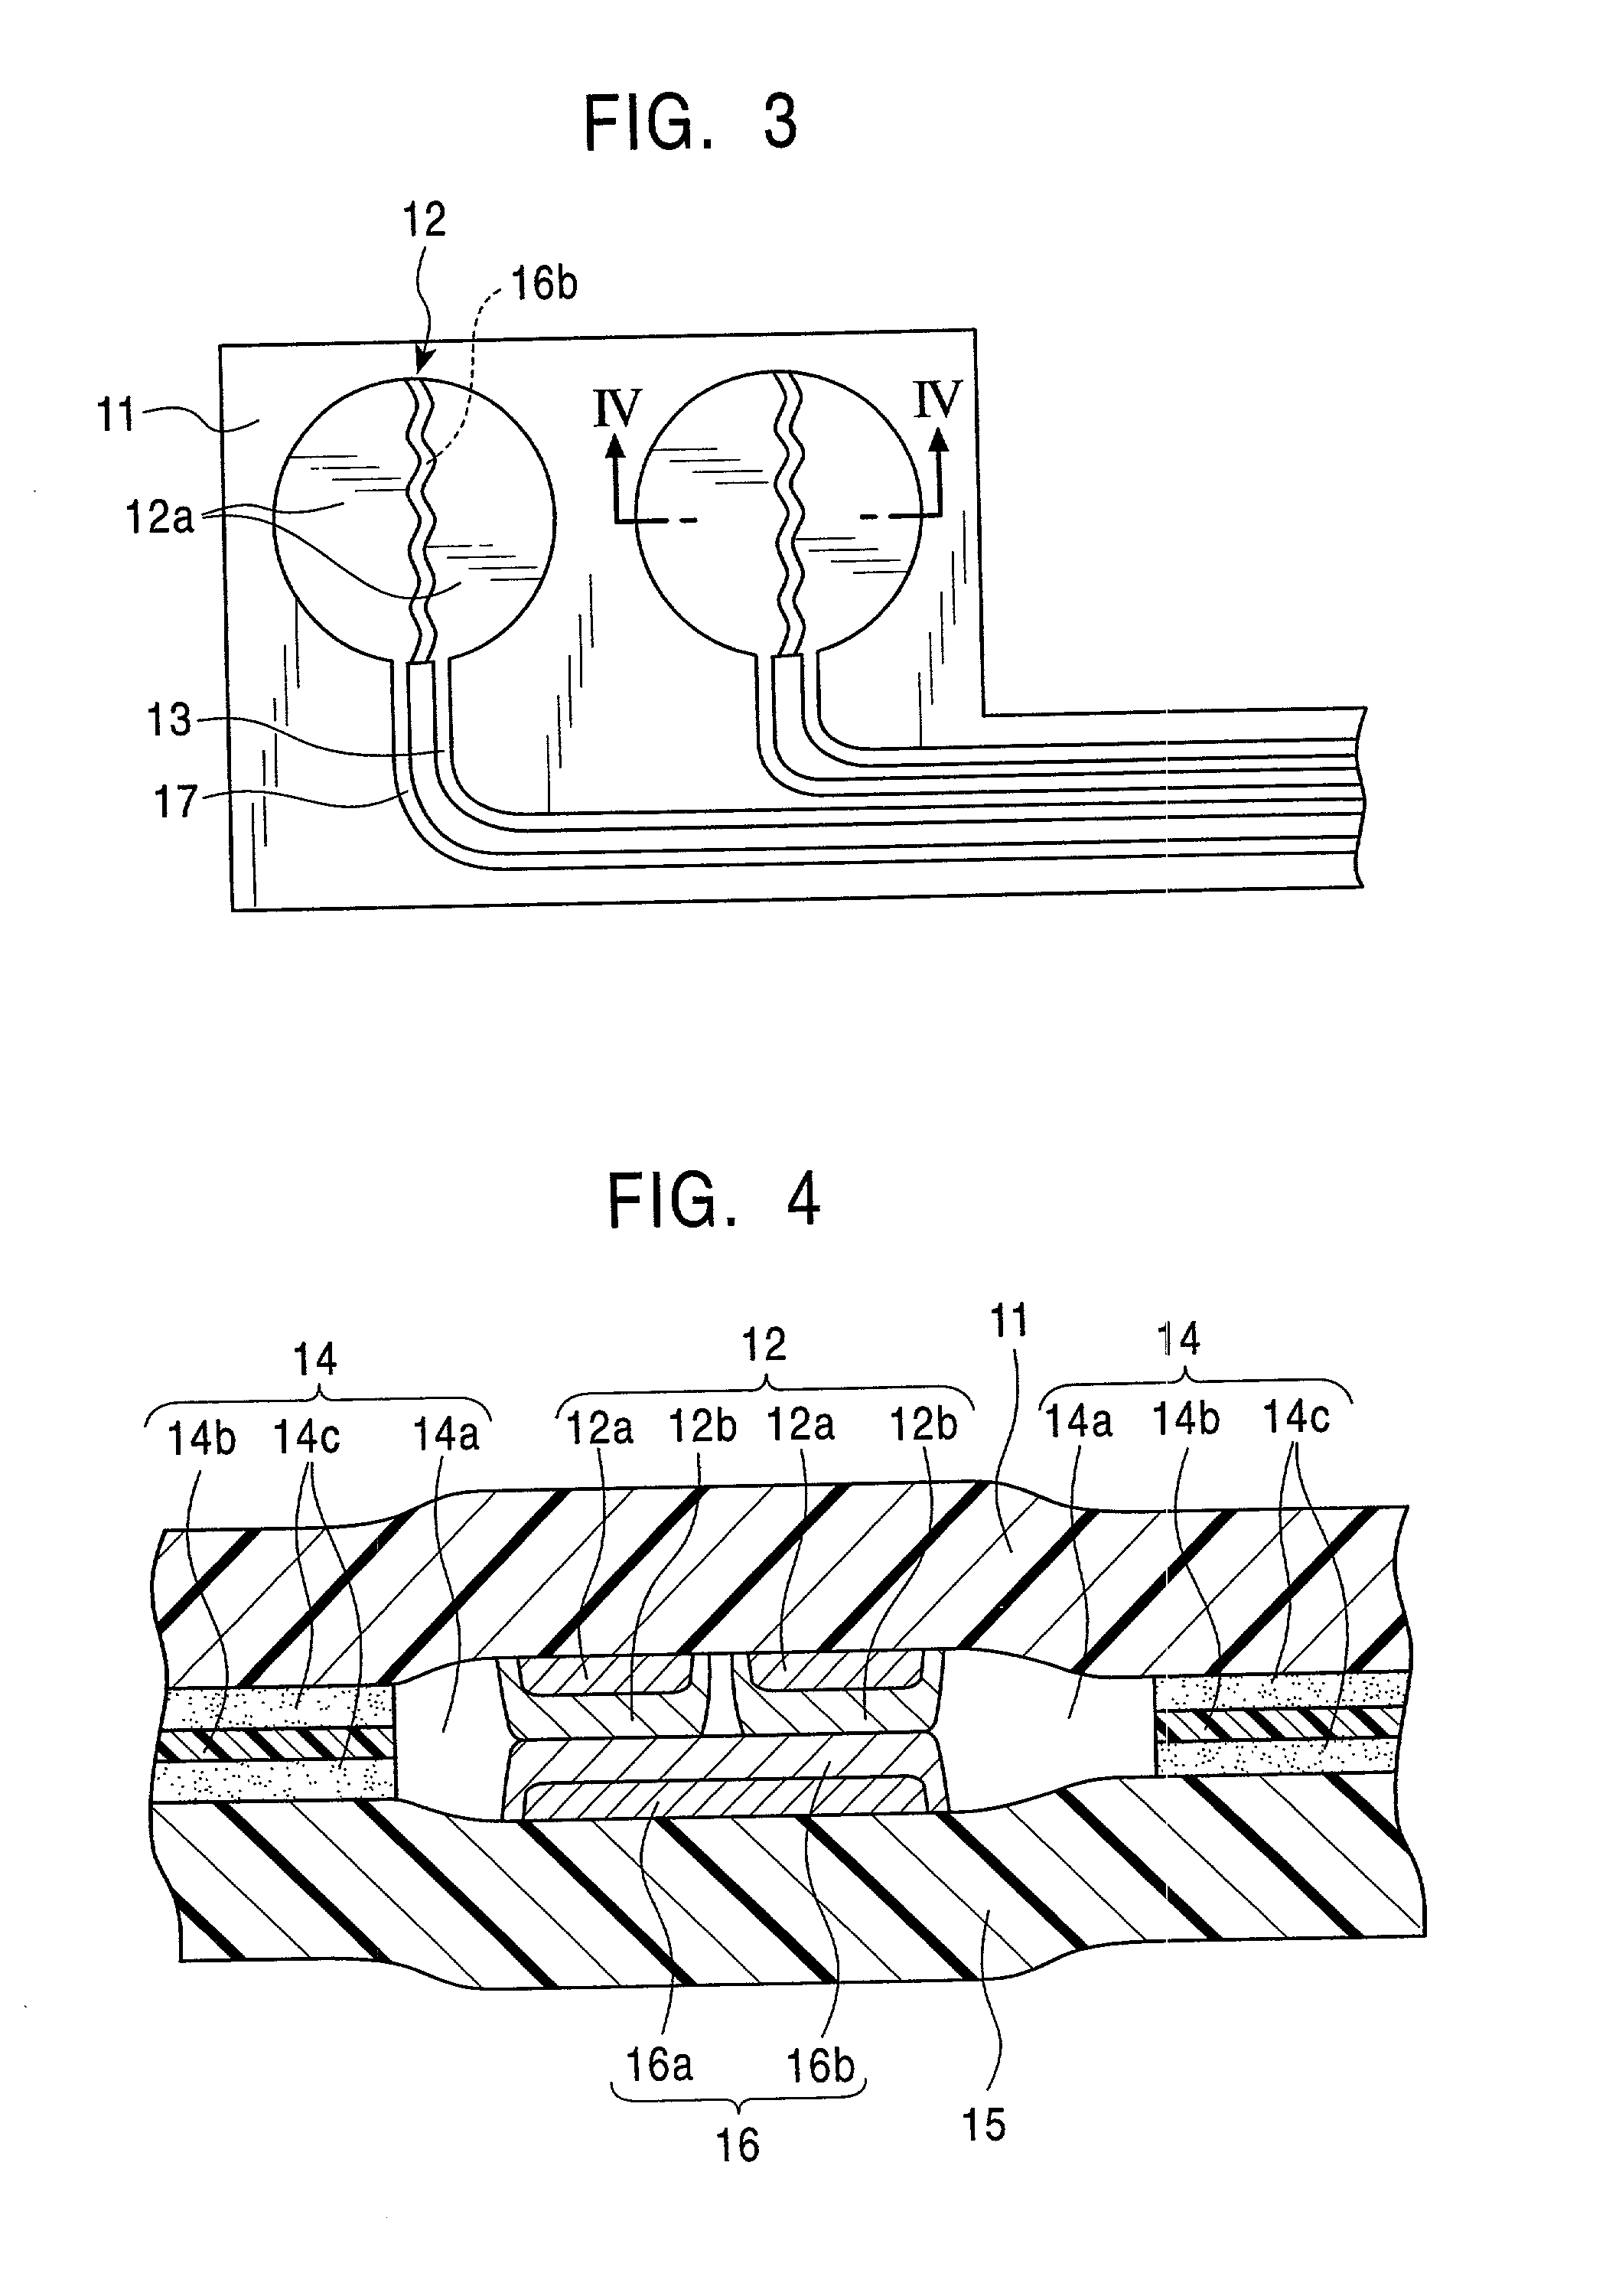 Electronic pressure-sensitive device for detecting the magnitude of load as electrical resistance